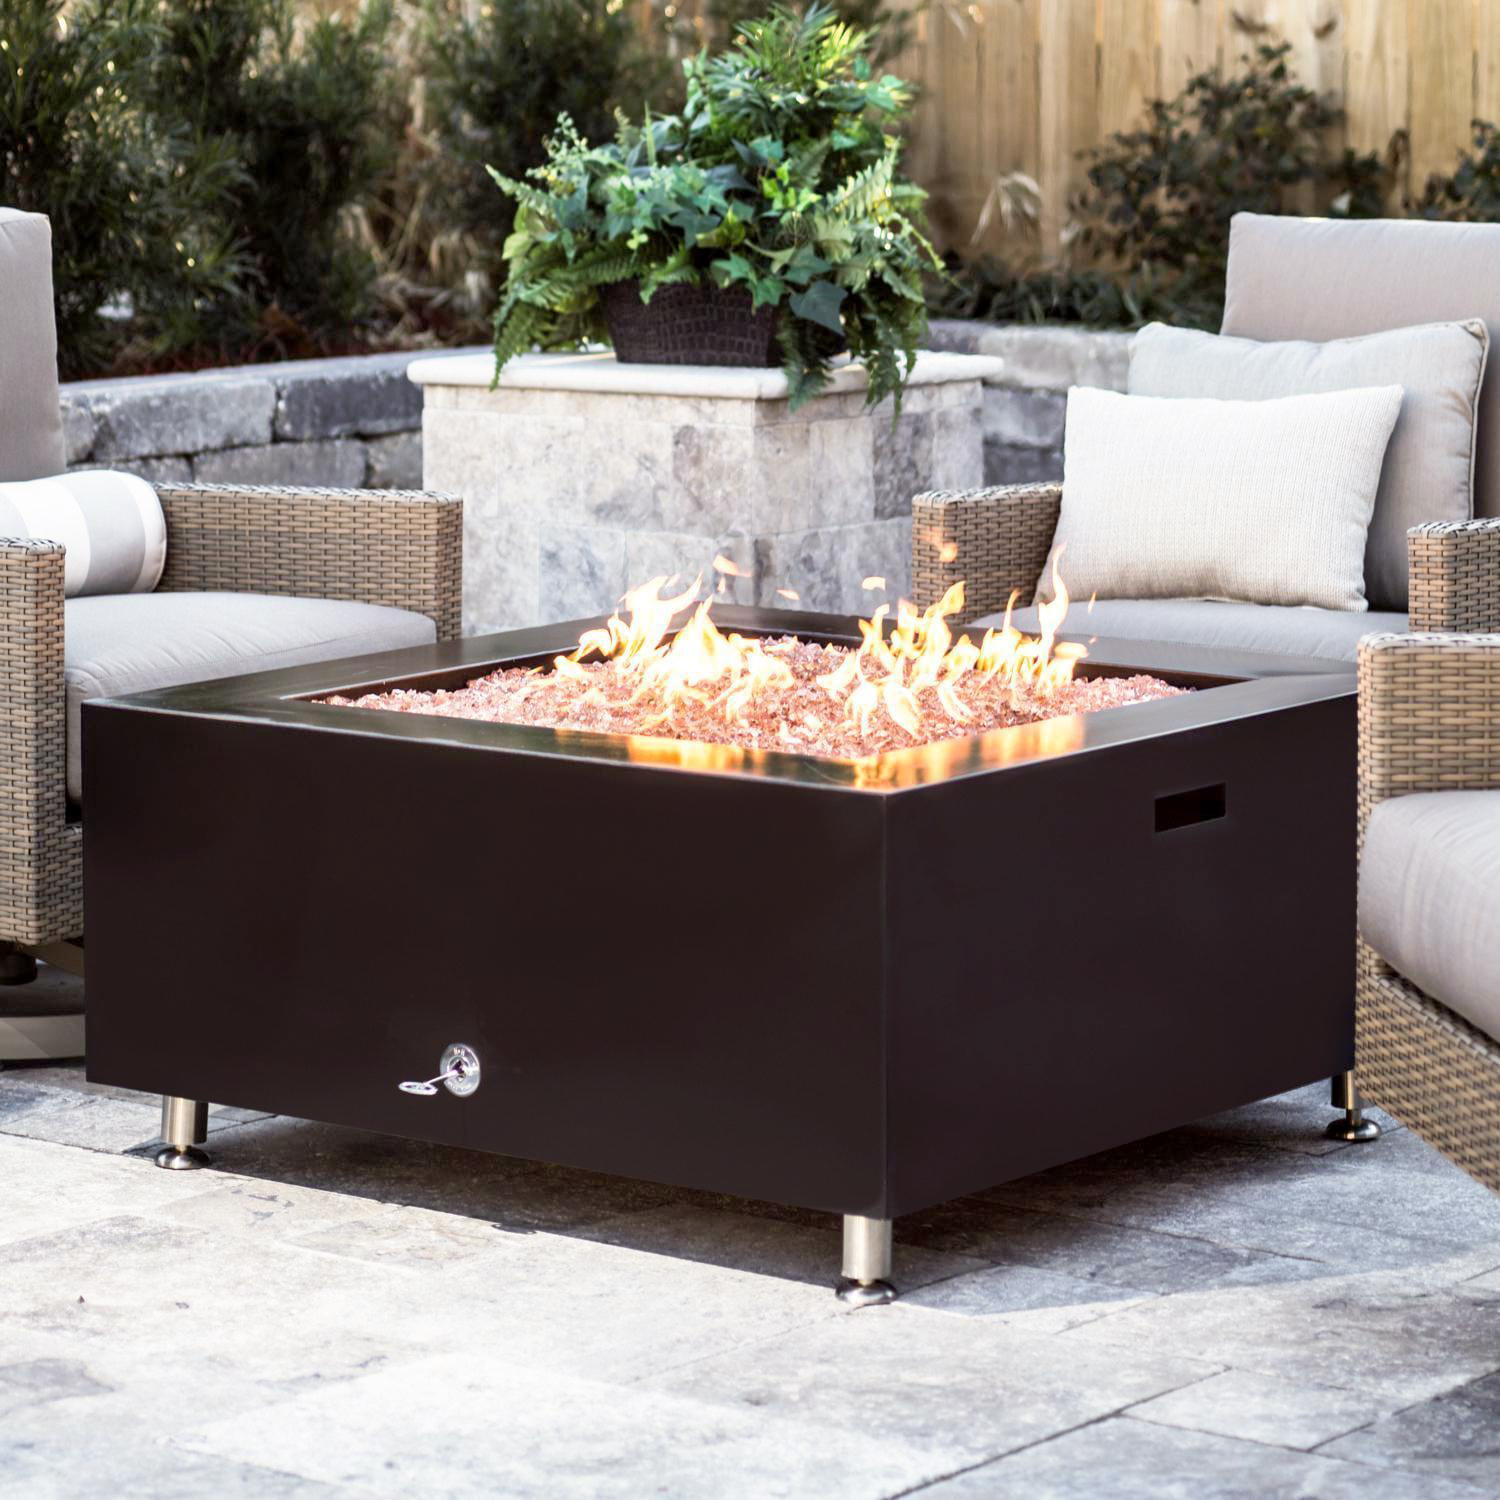 Lakeview Outdoor Designs 42-Inch Oil Rubbed Bronze Square Fire Pit ...
